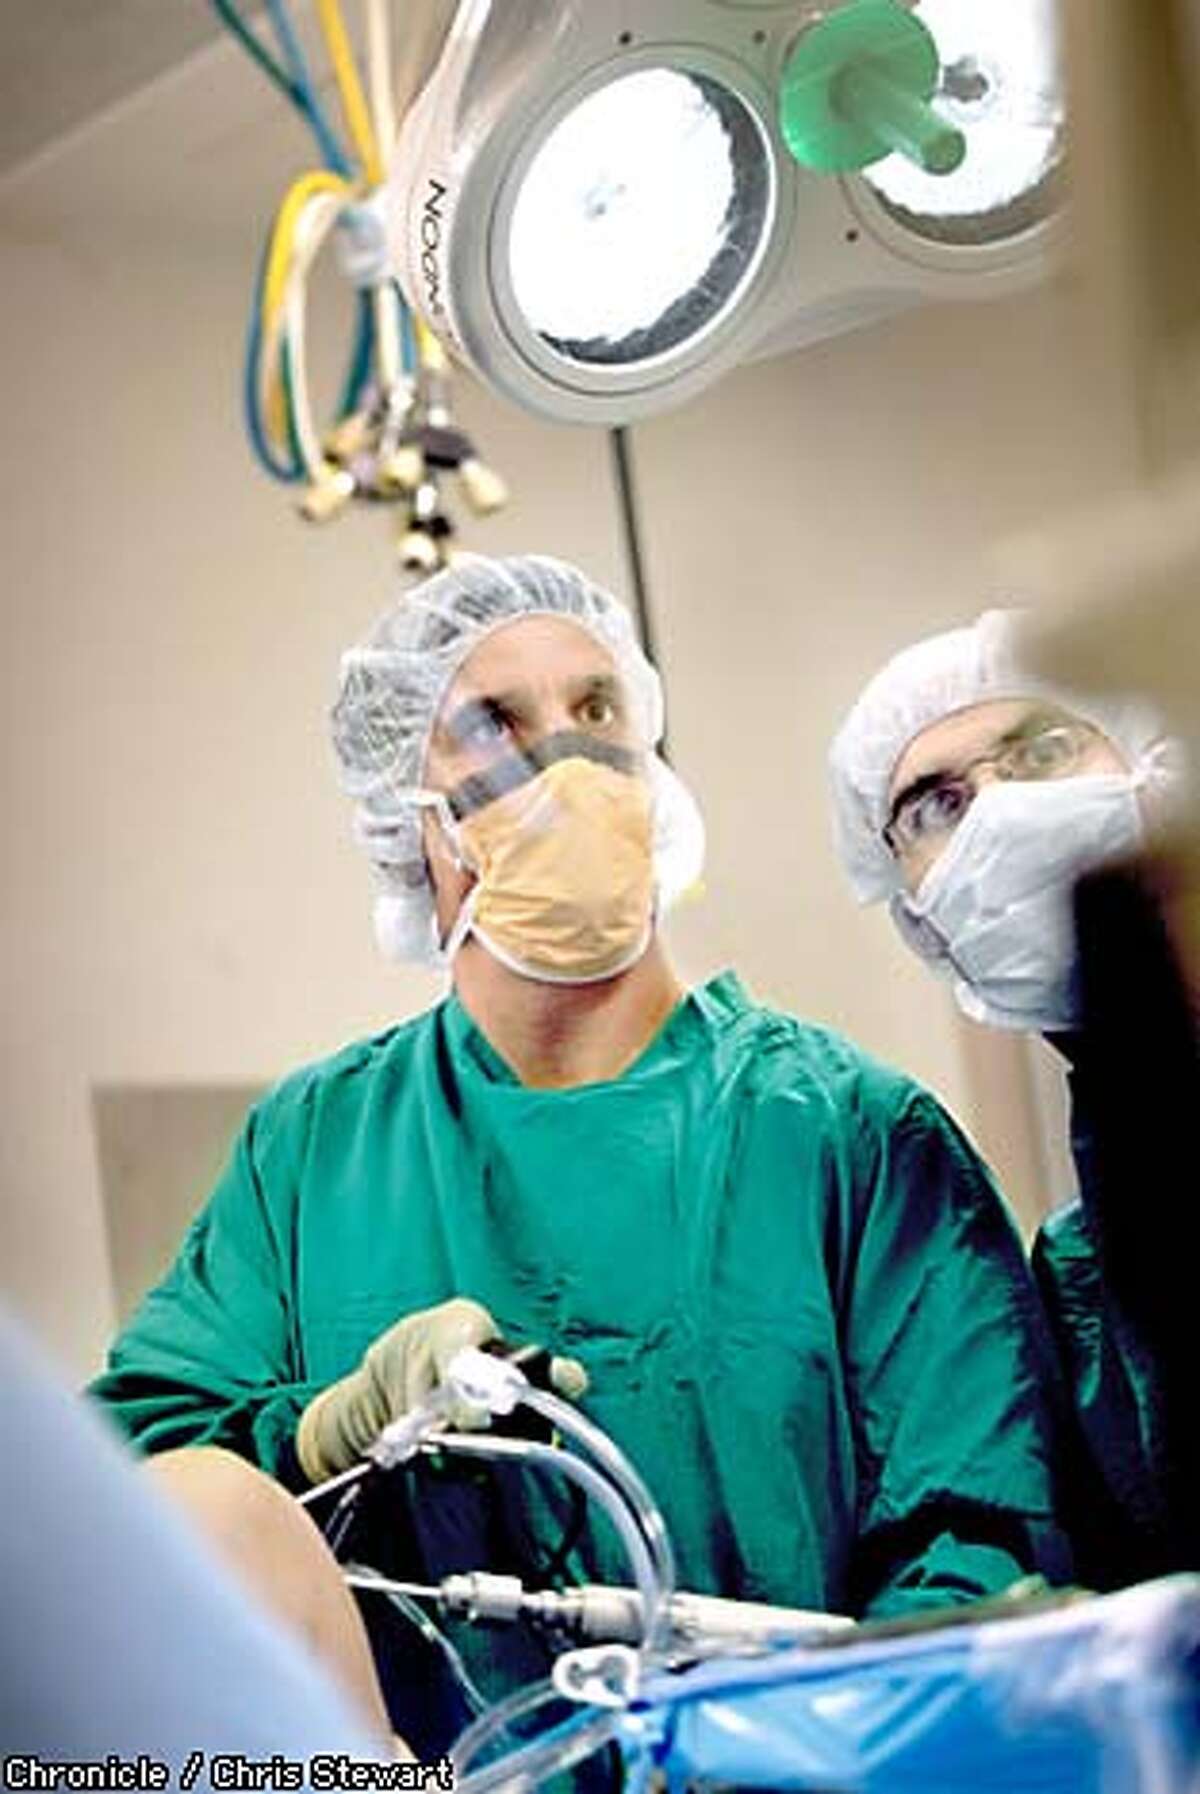 On the case: Dr. Eric Heiden watches a monitor as he performs orthopedic surgery at UC Davis Medical Center. Chronicle photo by Chris Stewart